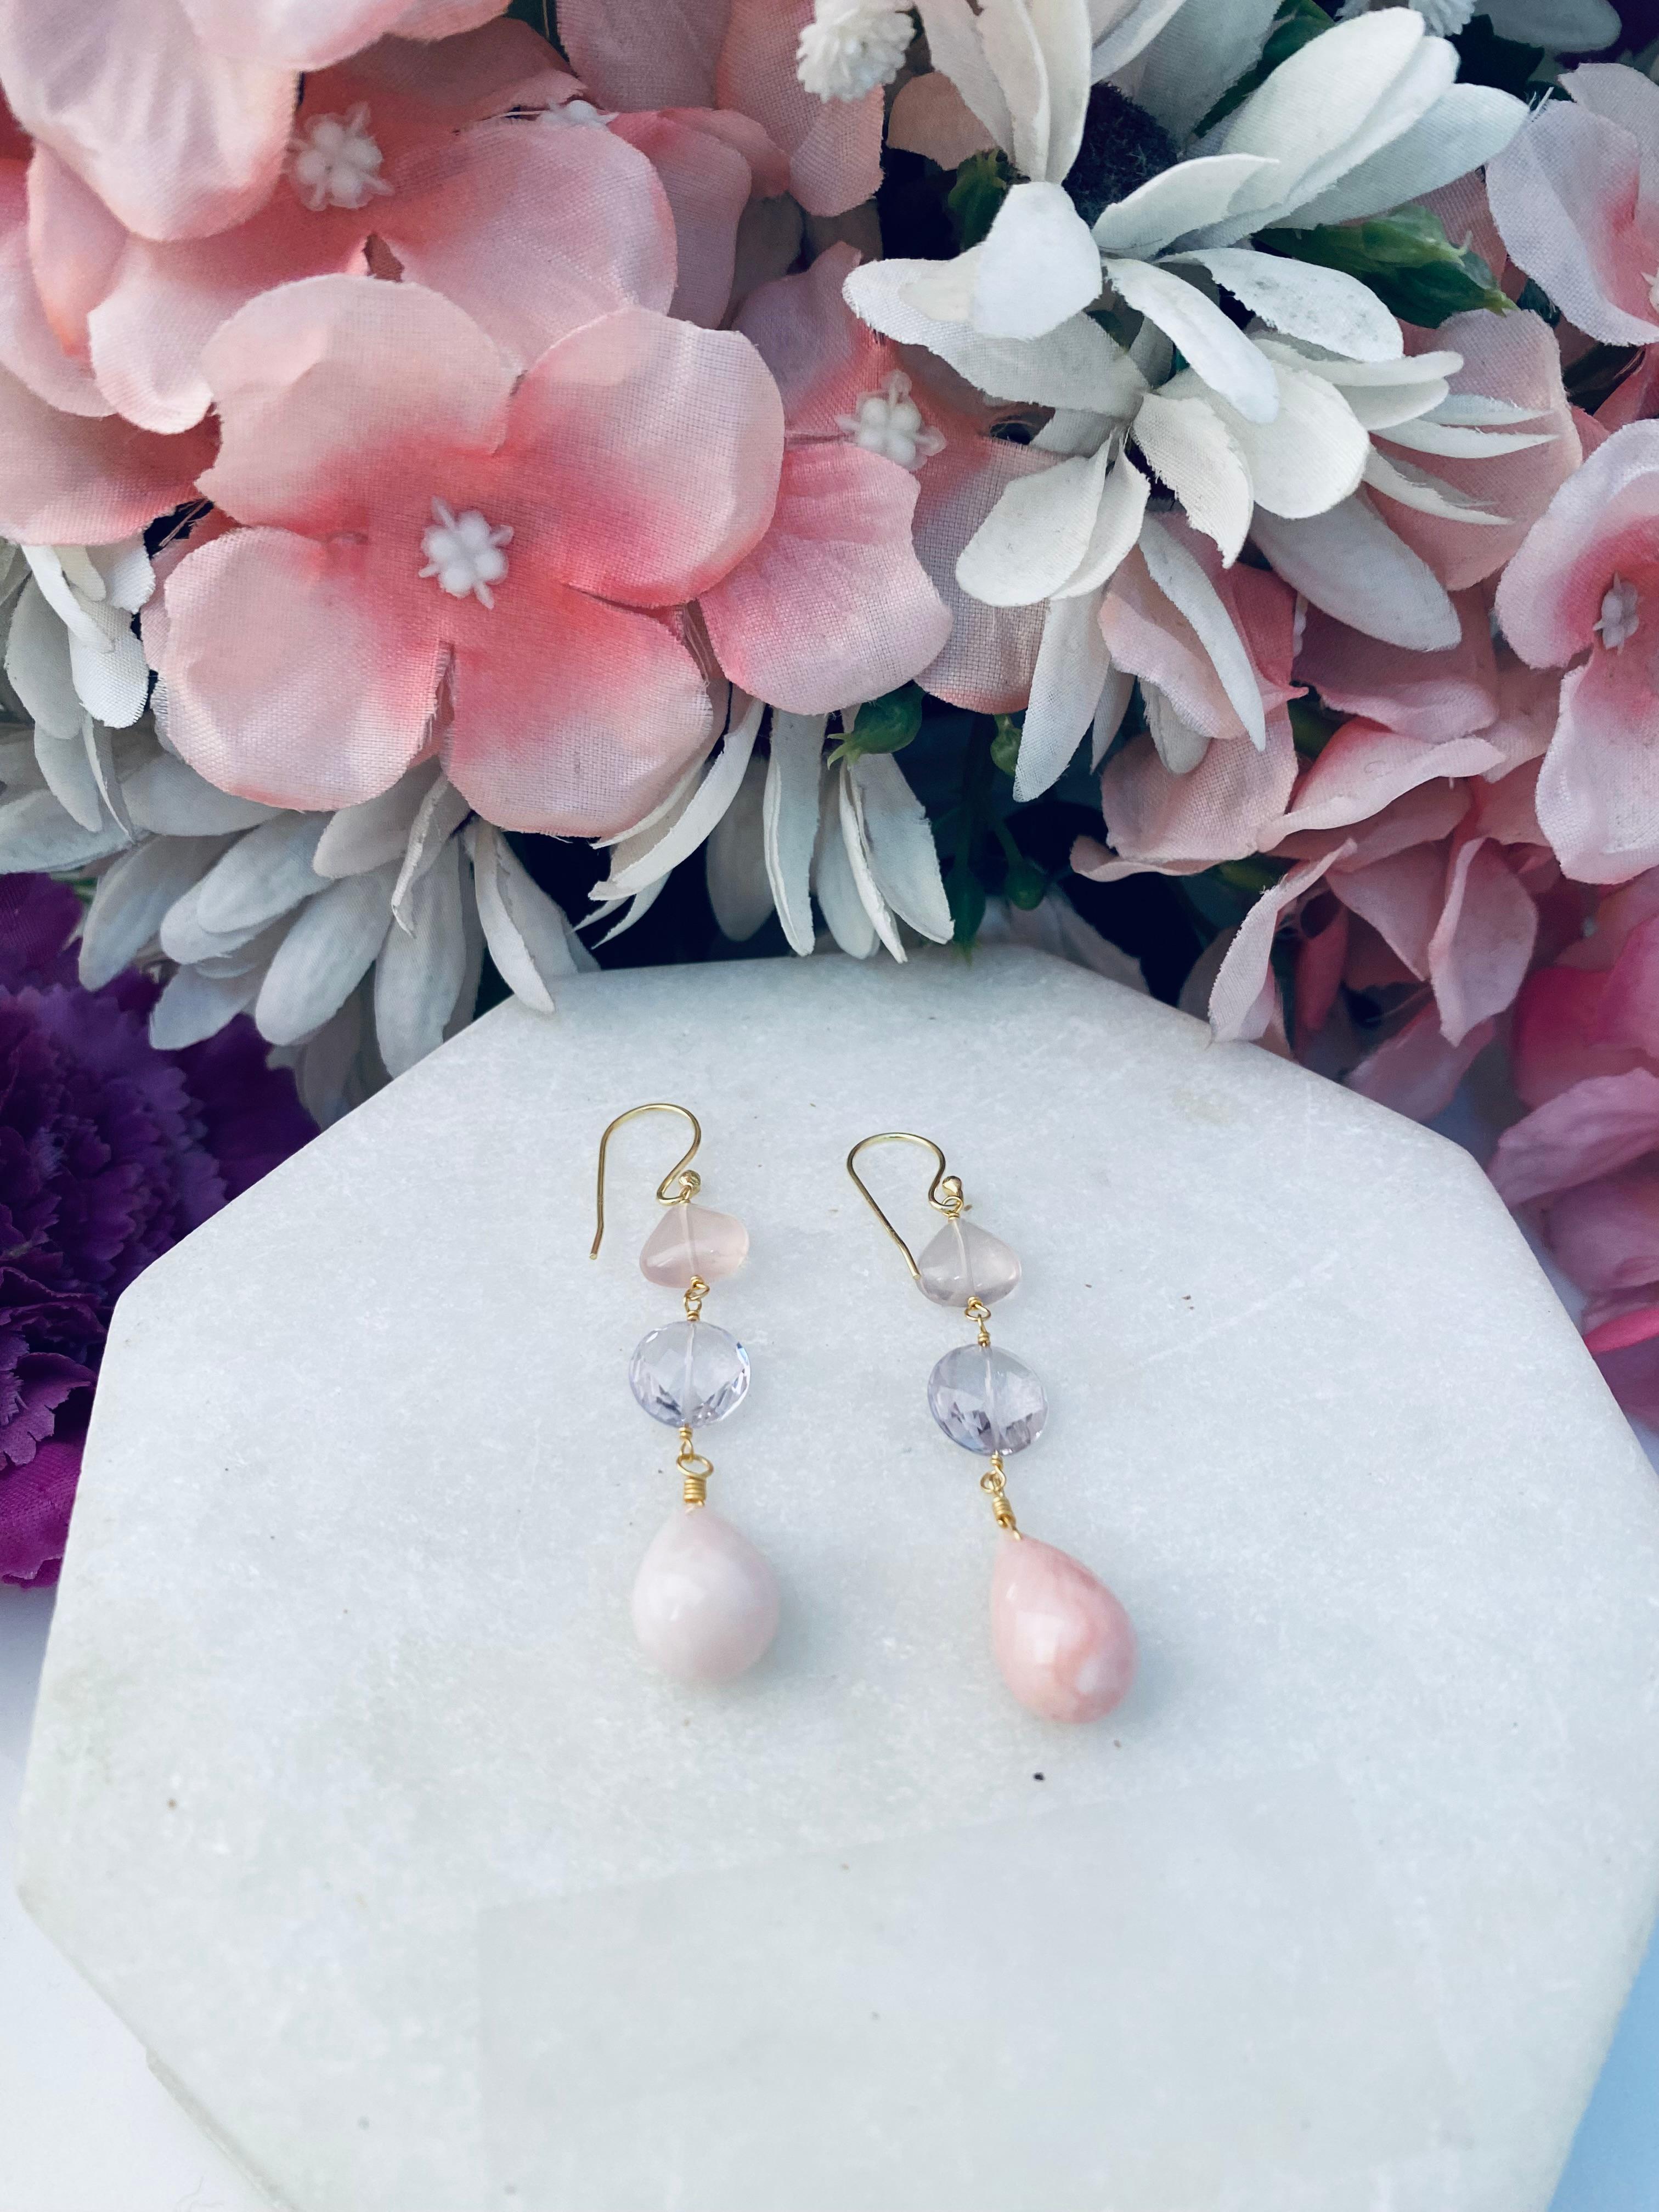 Natural Mixed Gemstones Dangle Earring, Silver Earring, Fine Silver Earring, Handmade Jewelry Earring, Gifts 

Gemstone Details

Gemstone : Pink Opal, Amethyst, Rose Quartz
Gemstone Weight : 29.7 Carats Avg.
Type : Natural
Shape : Rounds, Drops,